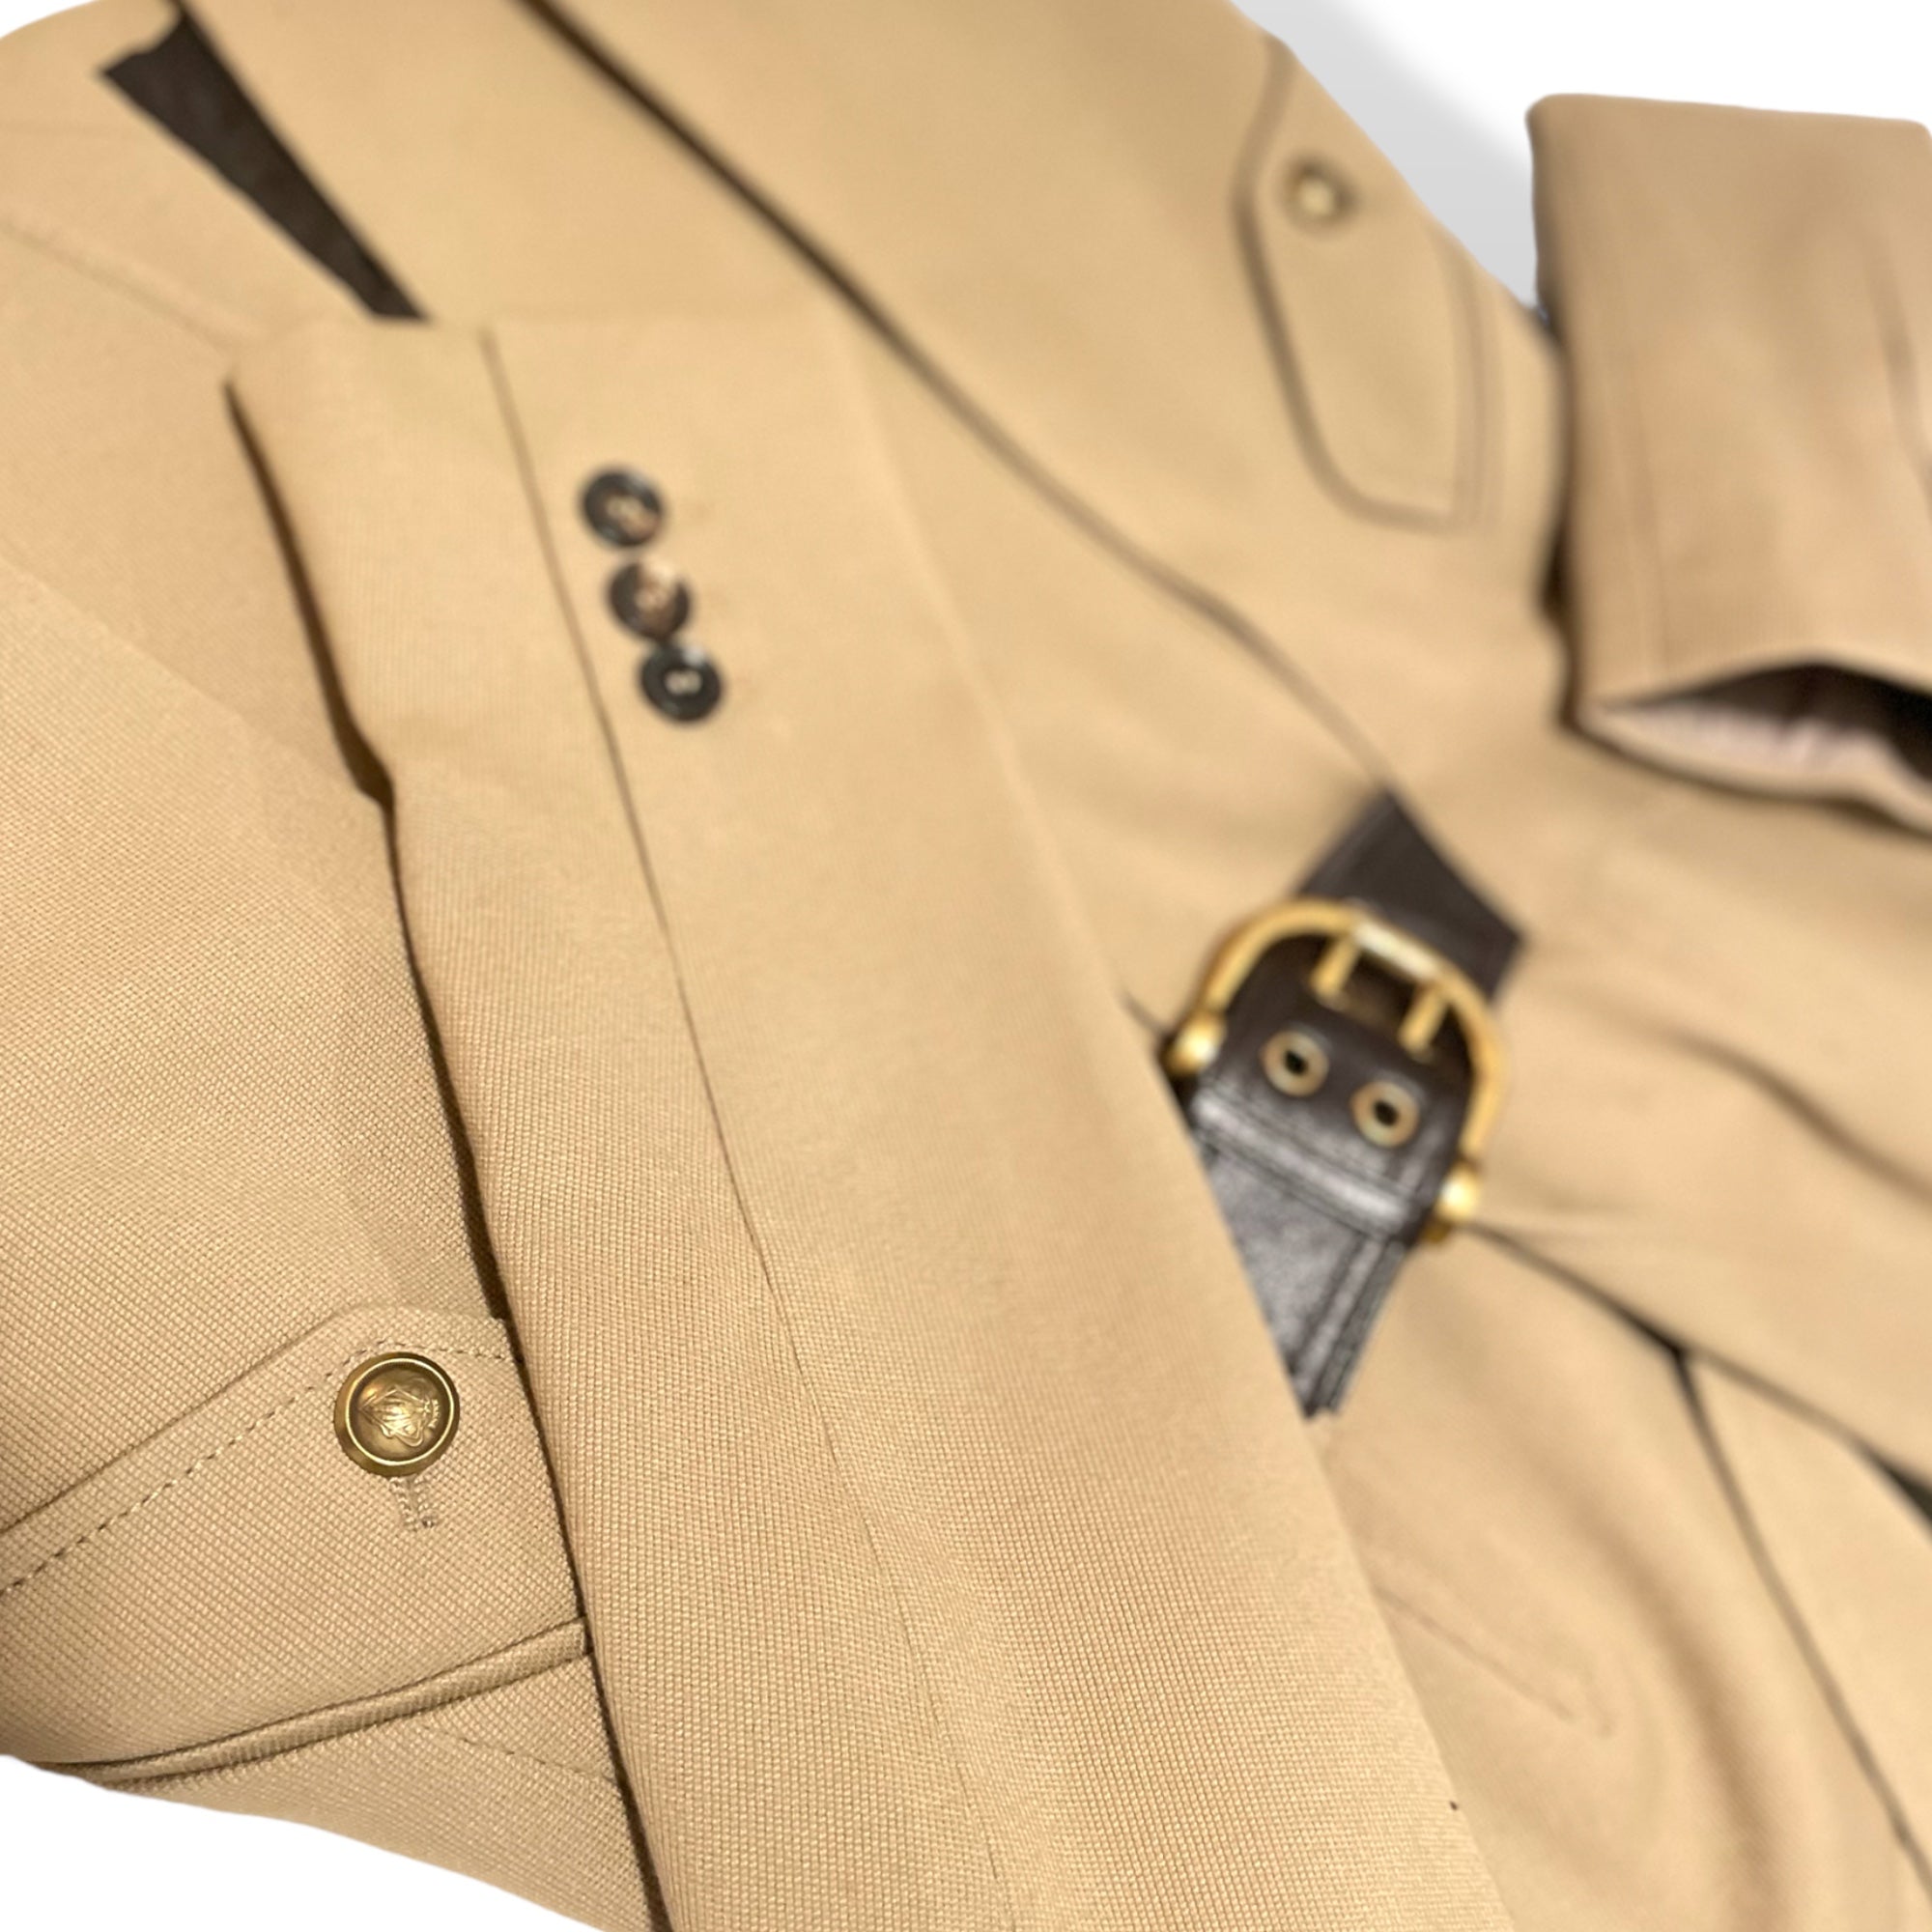 GUCCI Military Inspired Beige Canvas Jacket with Horse-bit Motif Accents |Size: 42|